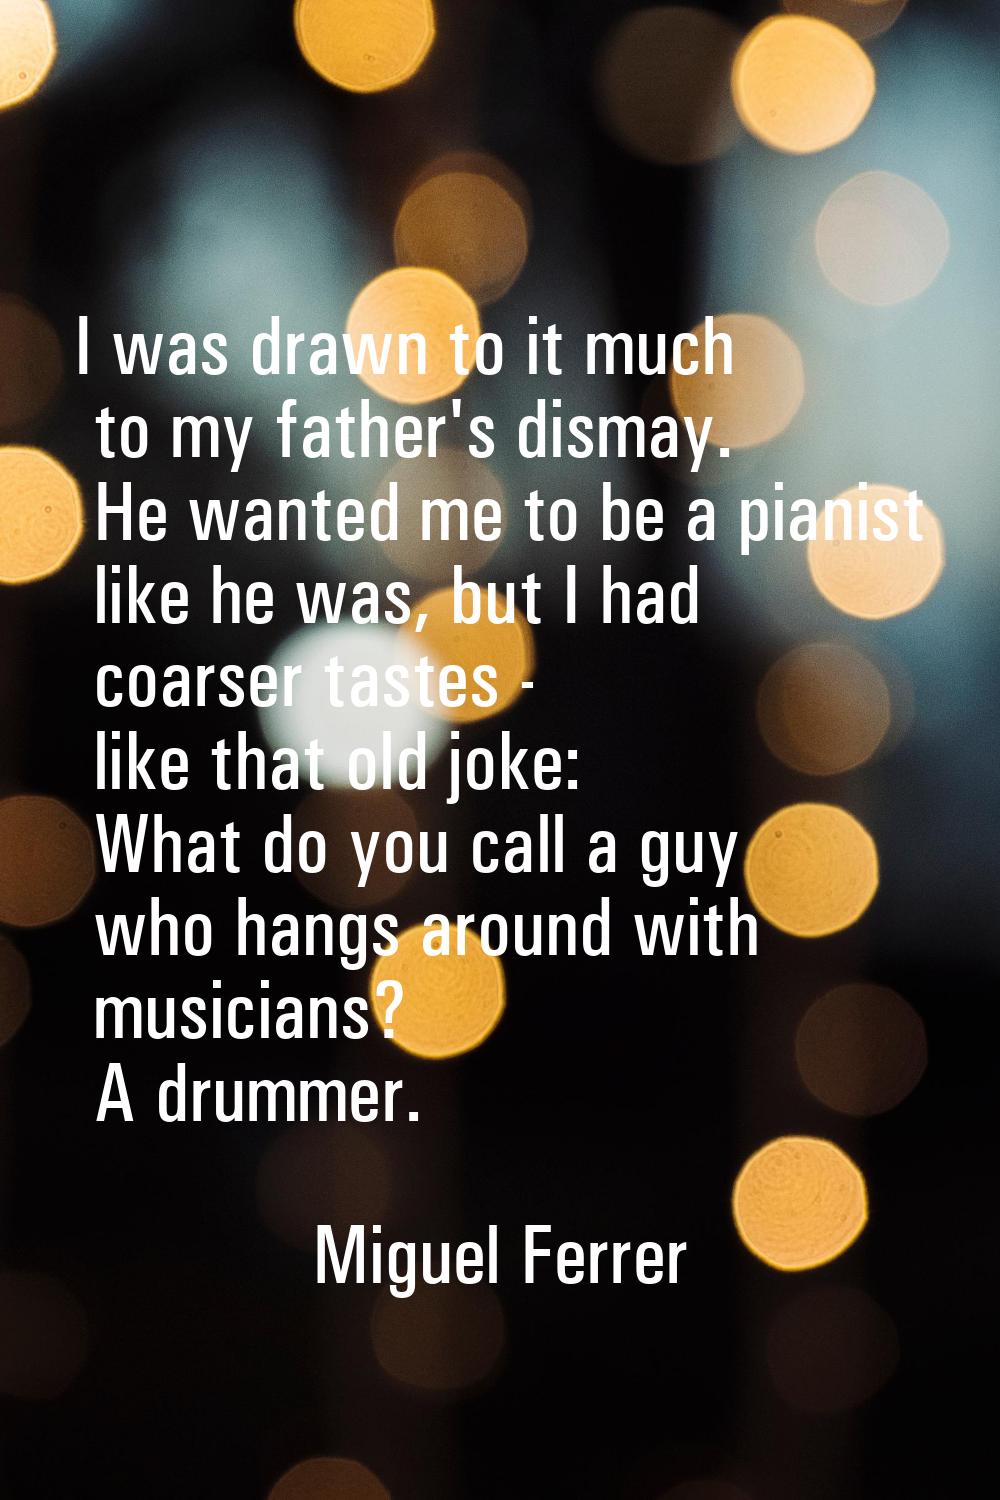 I was drawn to it much to my father's dismay. He wanted me to be a pianist like he was, but I had c